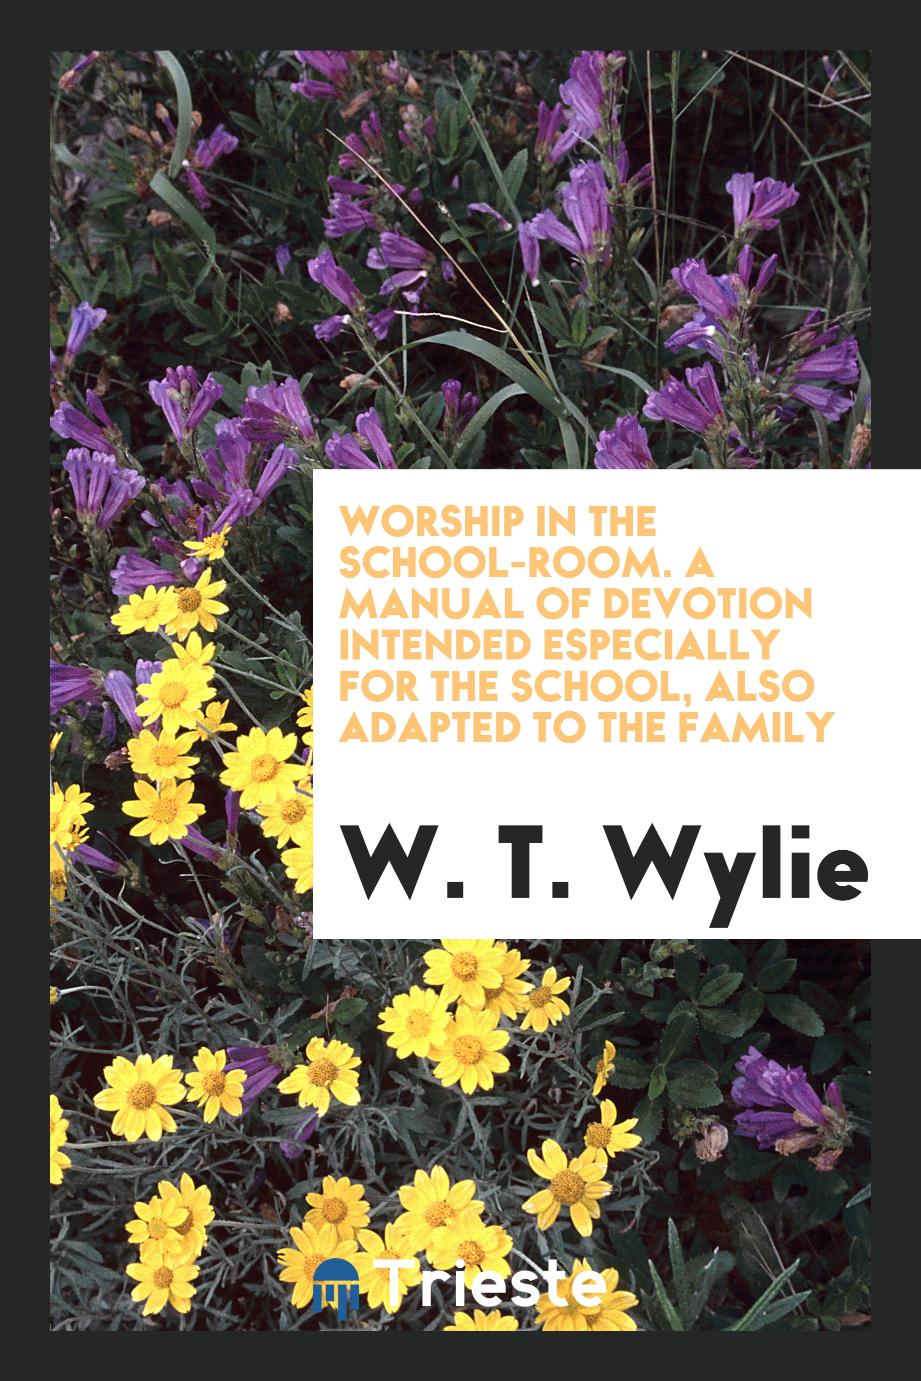 Worship in the School-Room. A Manual of Devotion Intended Especially for the School, Also Adapted to the Family